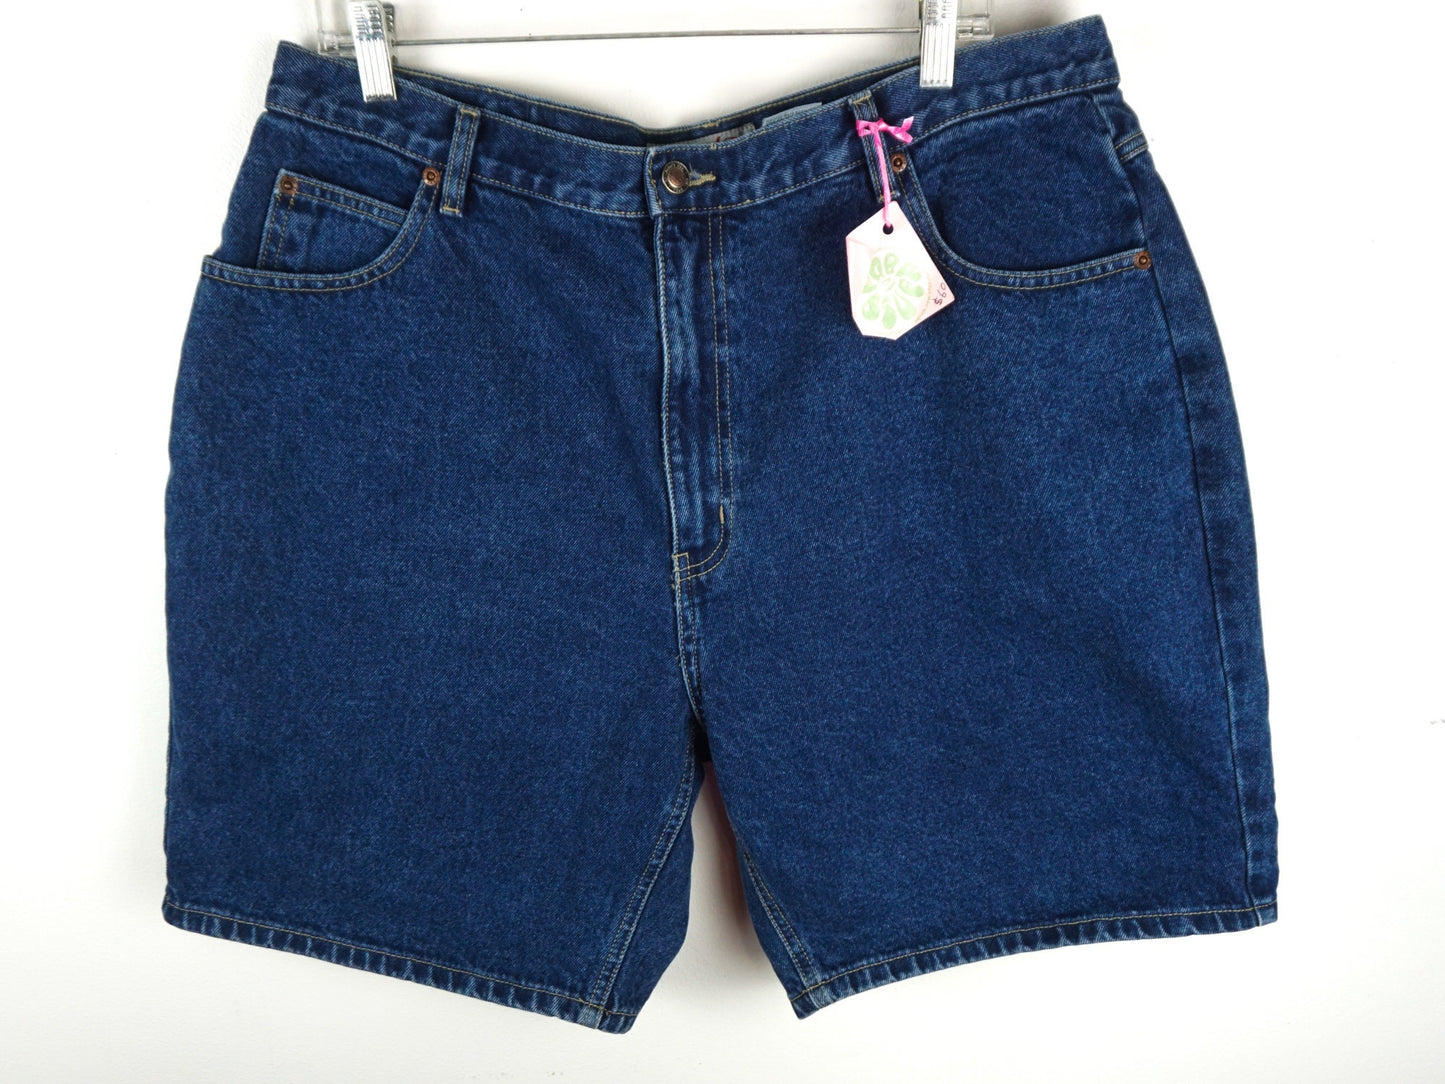 Painted Flower Jean Shorts, Size Extra Large